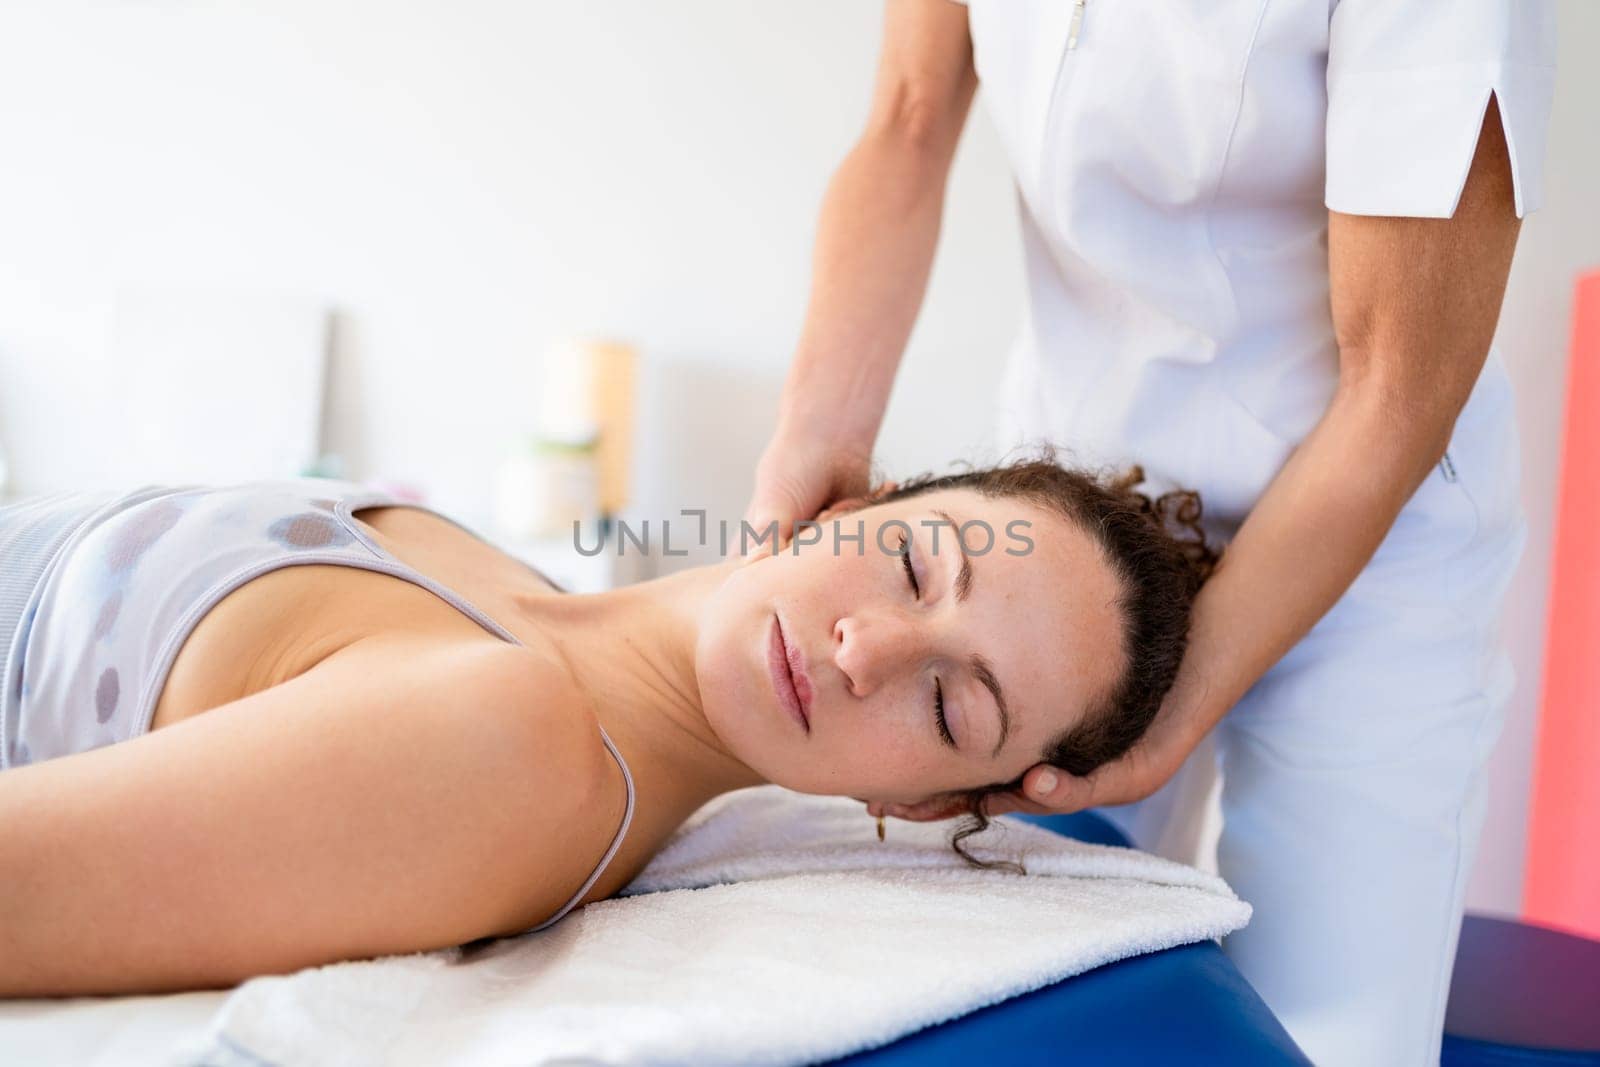 Crop anonymous female manual therapist massaging neck of young woman lying on couch during rehabilitation session